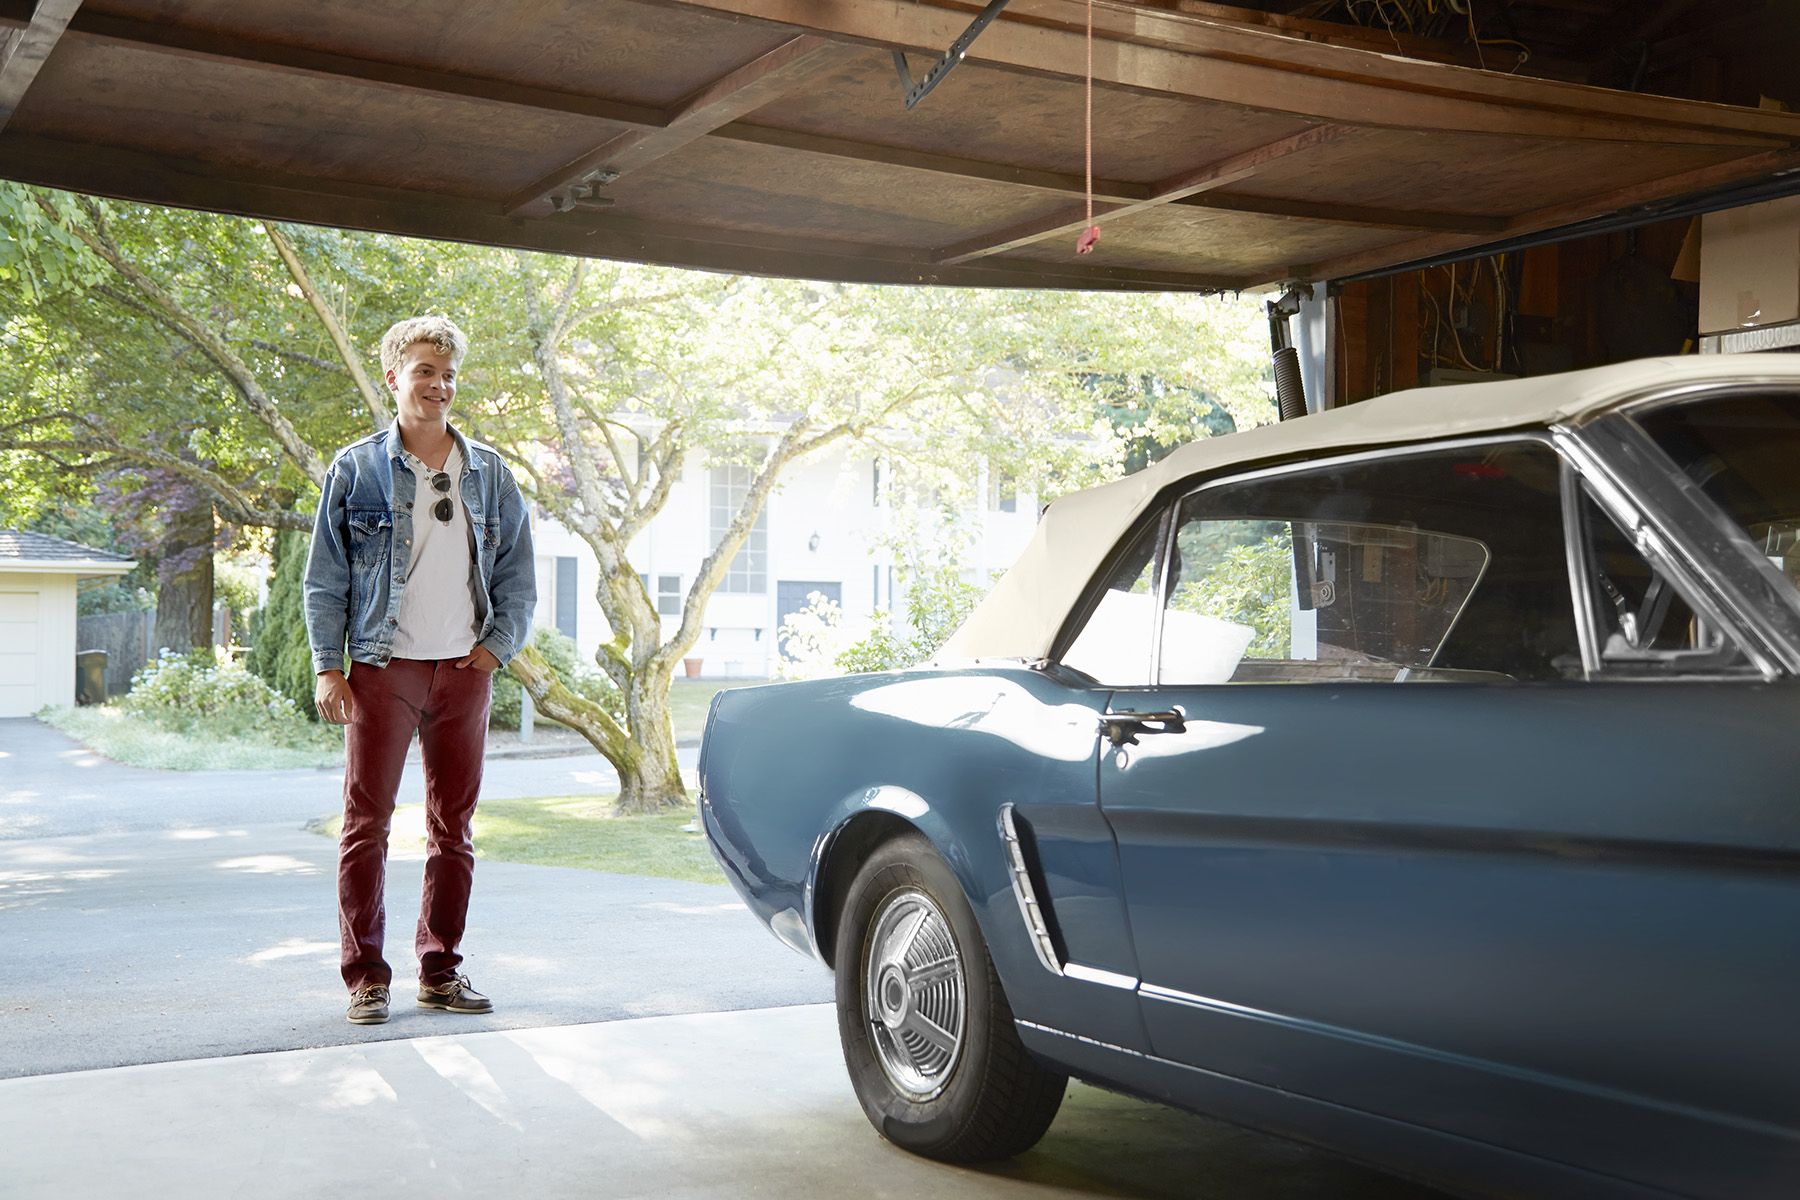 Young man happily staring at his vintage car inside a garage. He is dressed vintage too.
